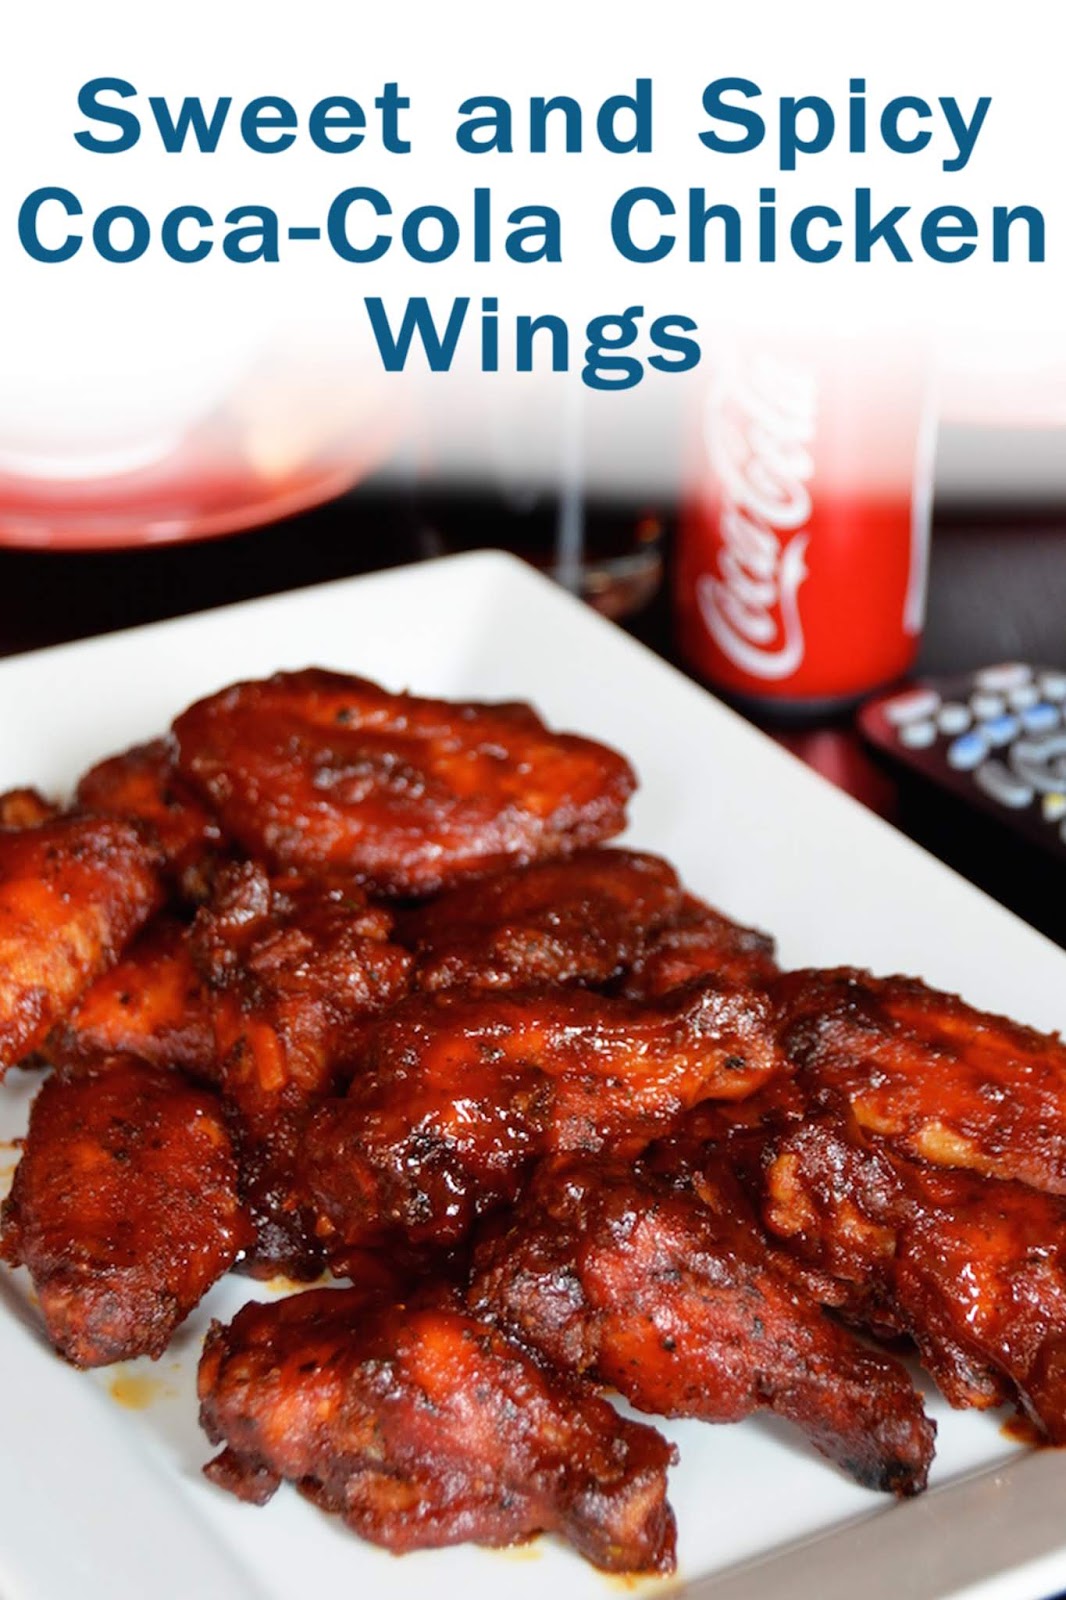 Sweet and Spicy Coca-Cola Chicken Wings